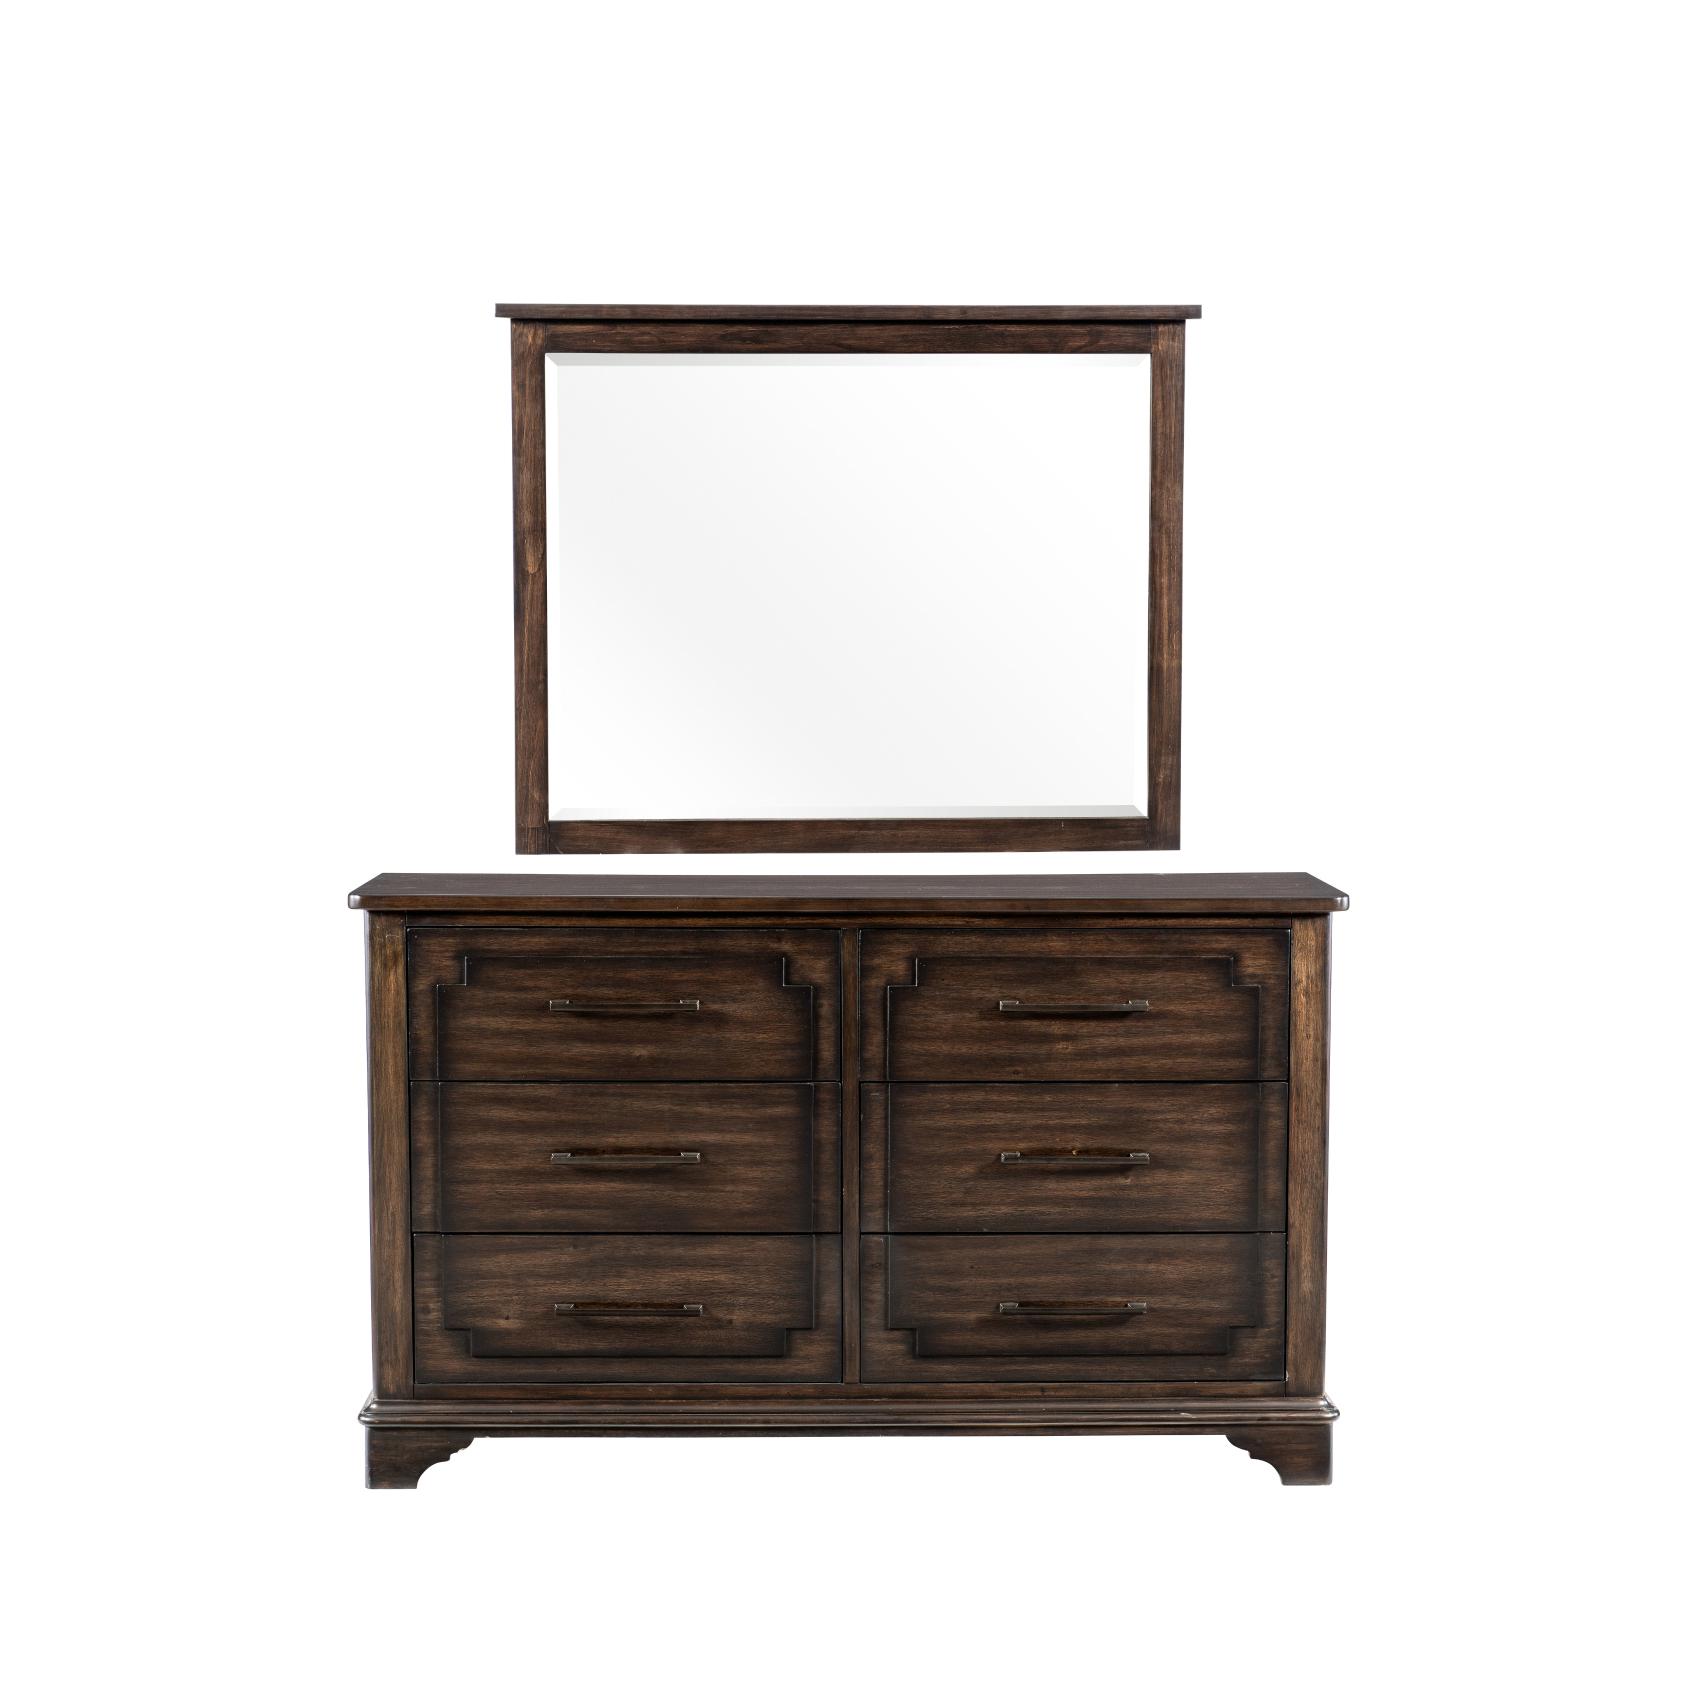 Traditional Dresser w/Mirror 1406-5*2PC 1406-5*2PC in Rustic Brown 